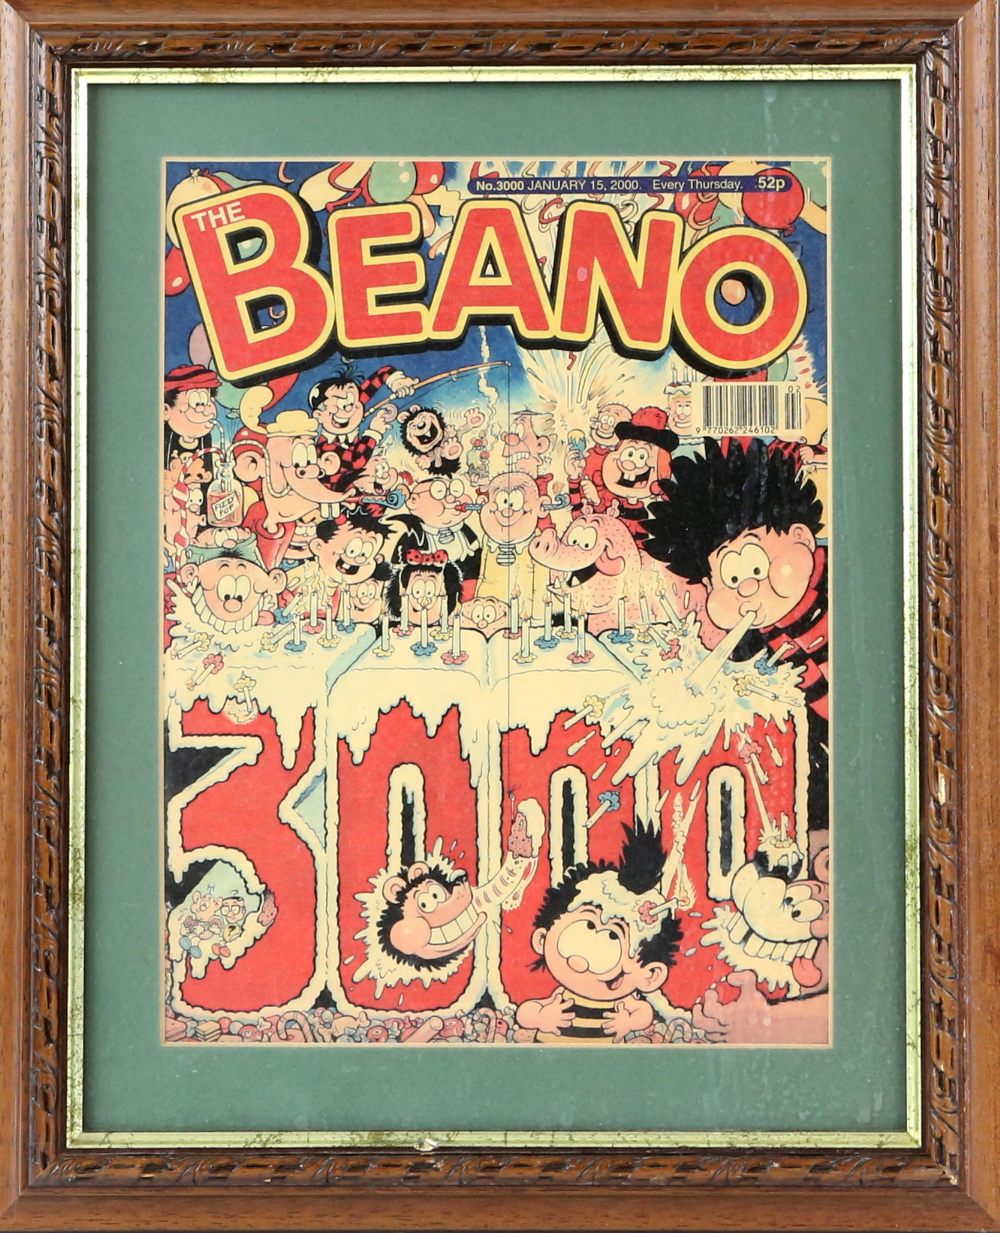 Framed items to include a framed copy of the Beano comic from the year 2000; Agent Provocateur